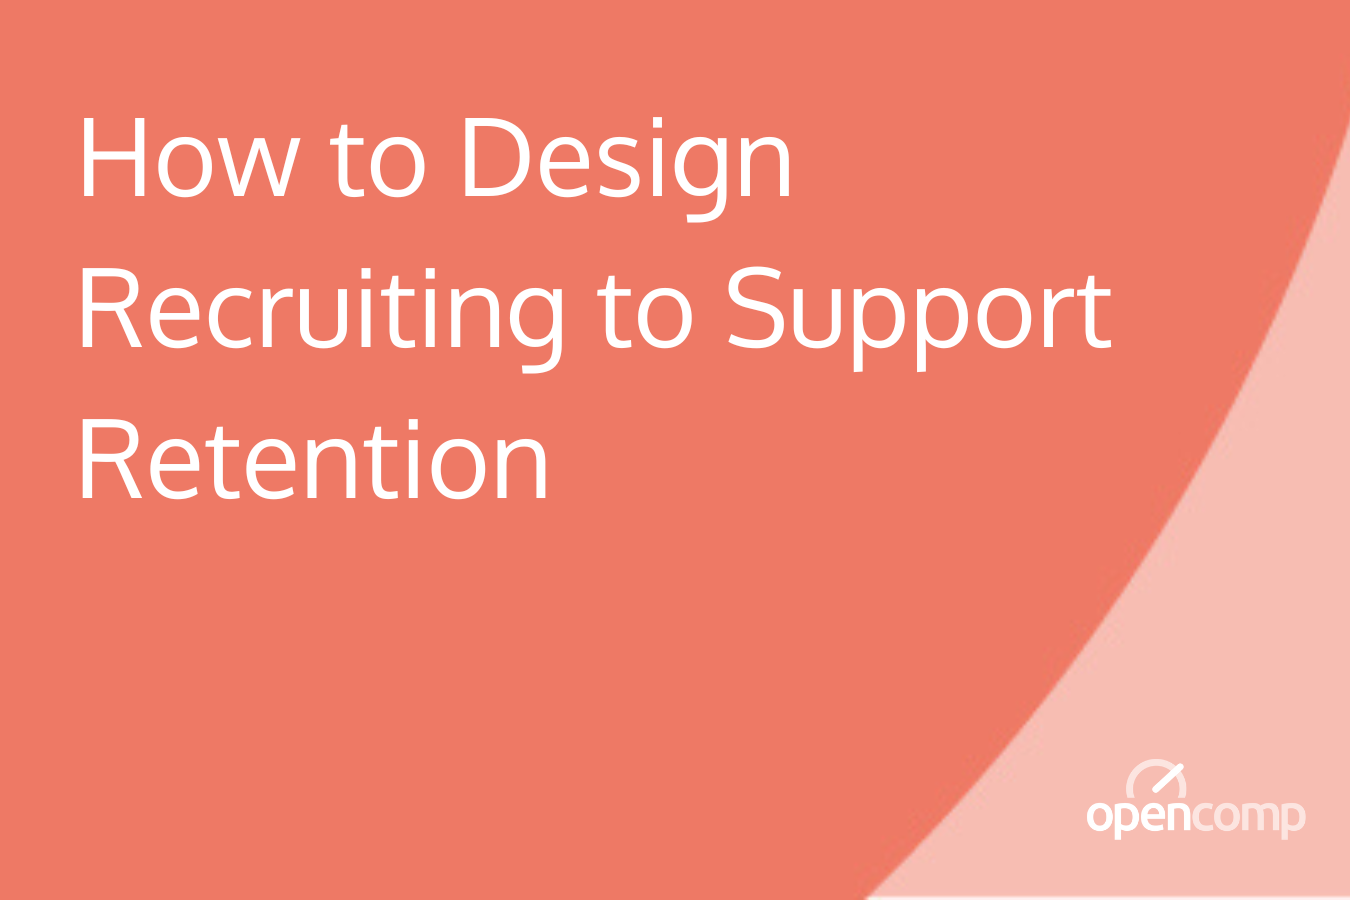 How to Design Recruiting to Support Retention